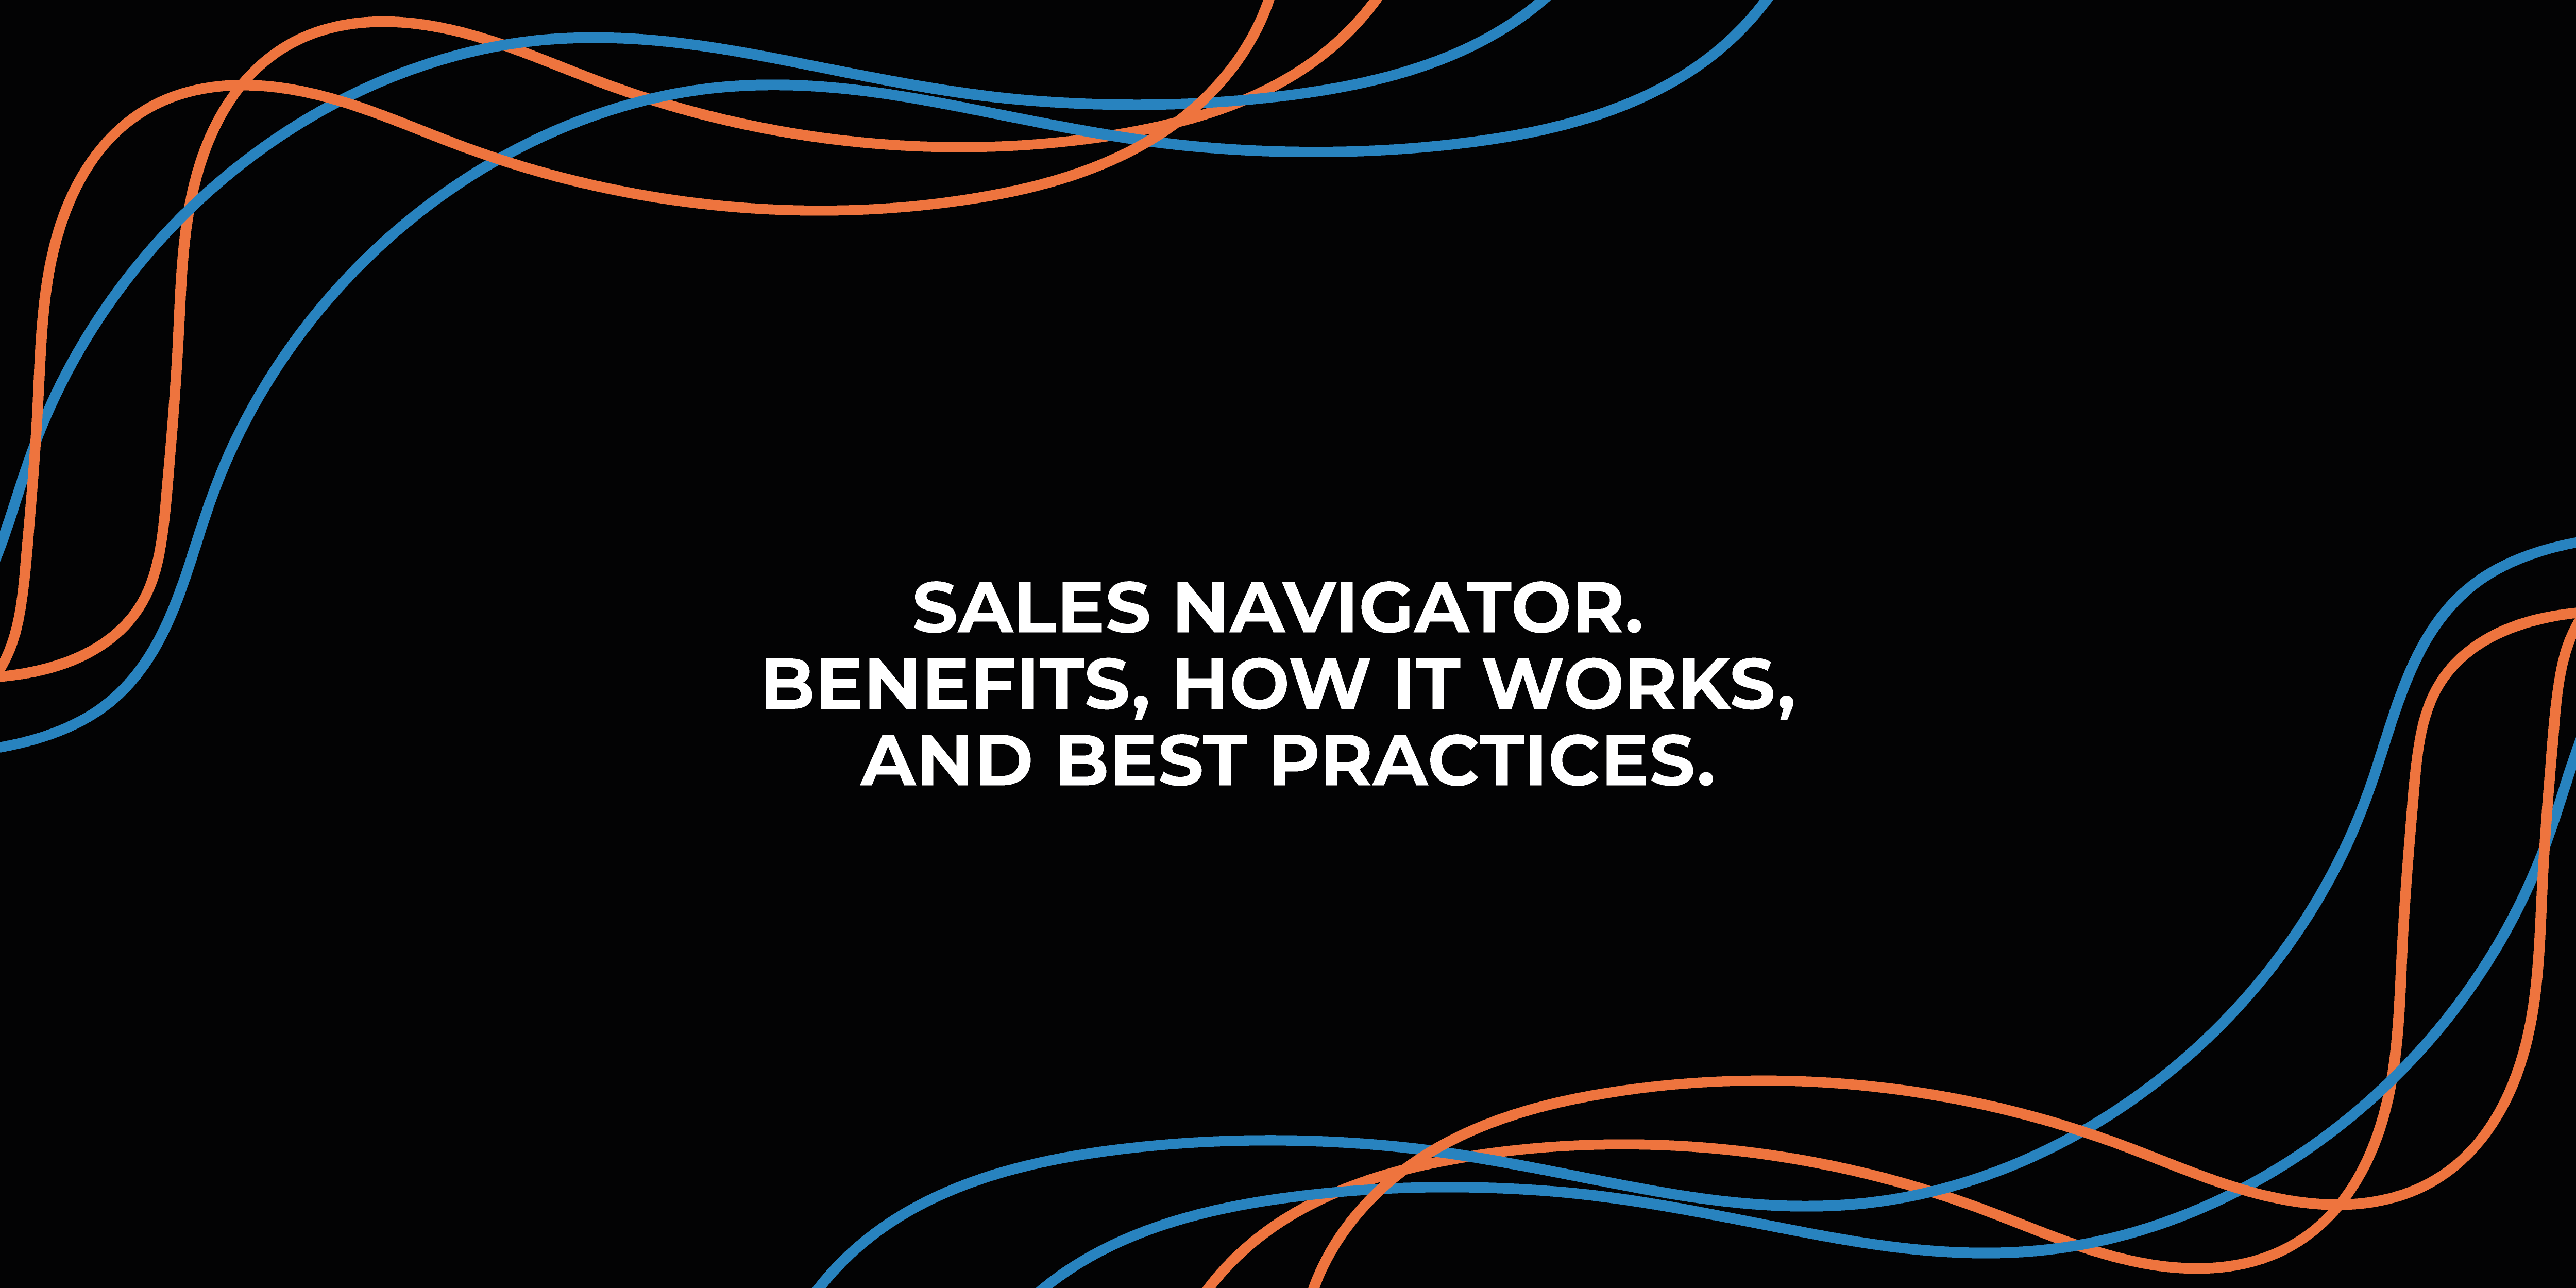 Sales Navigator. Benefits, How it Works, and Best Practices